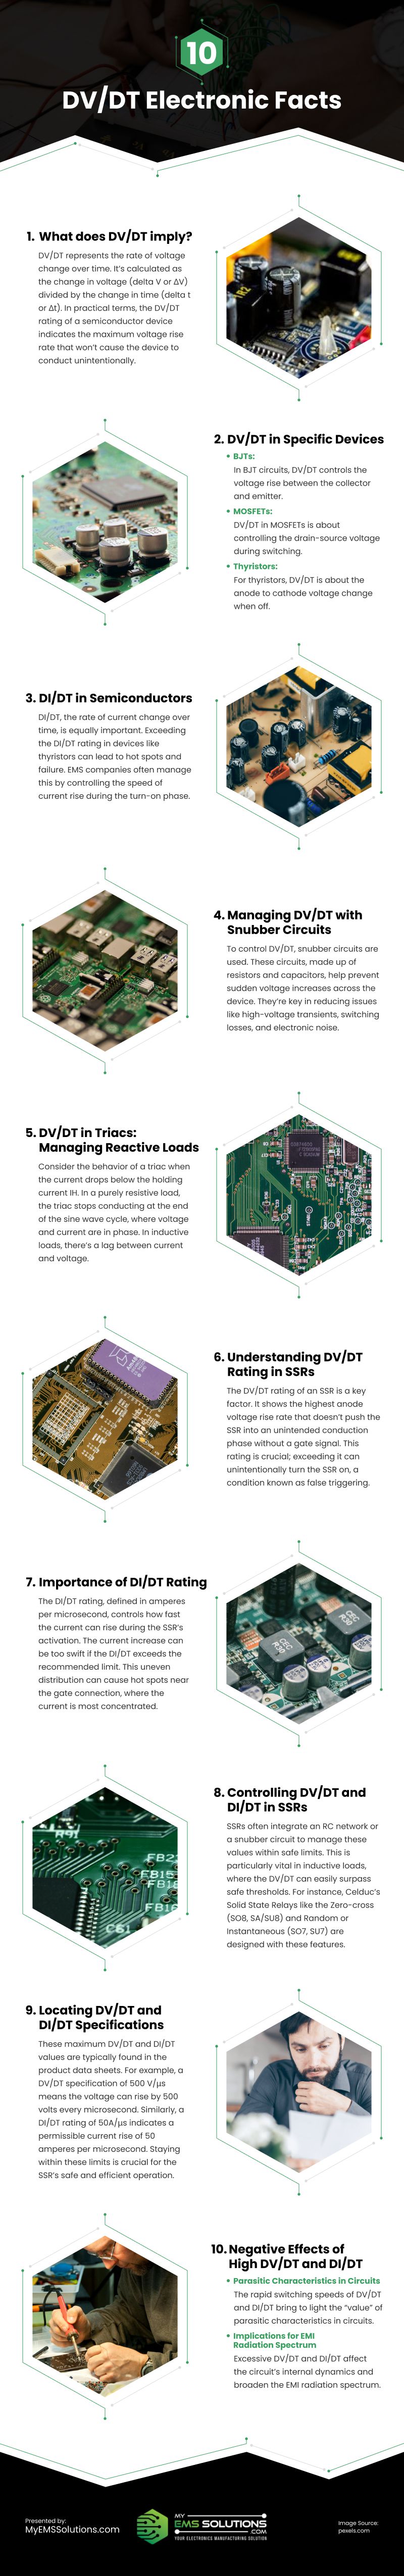 10 DV/DT Electronic Facts Infographic